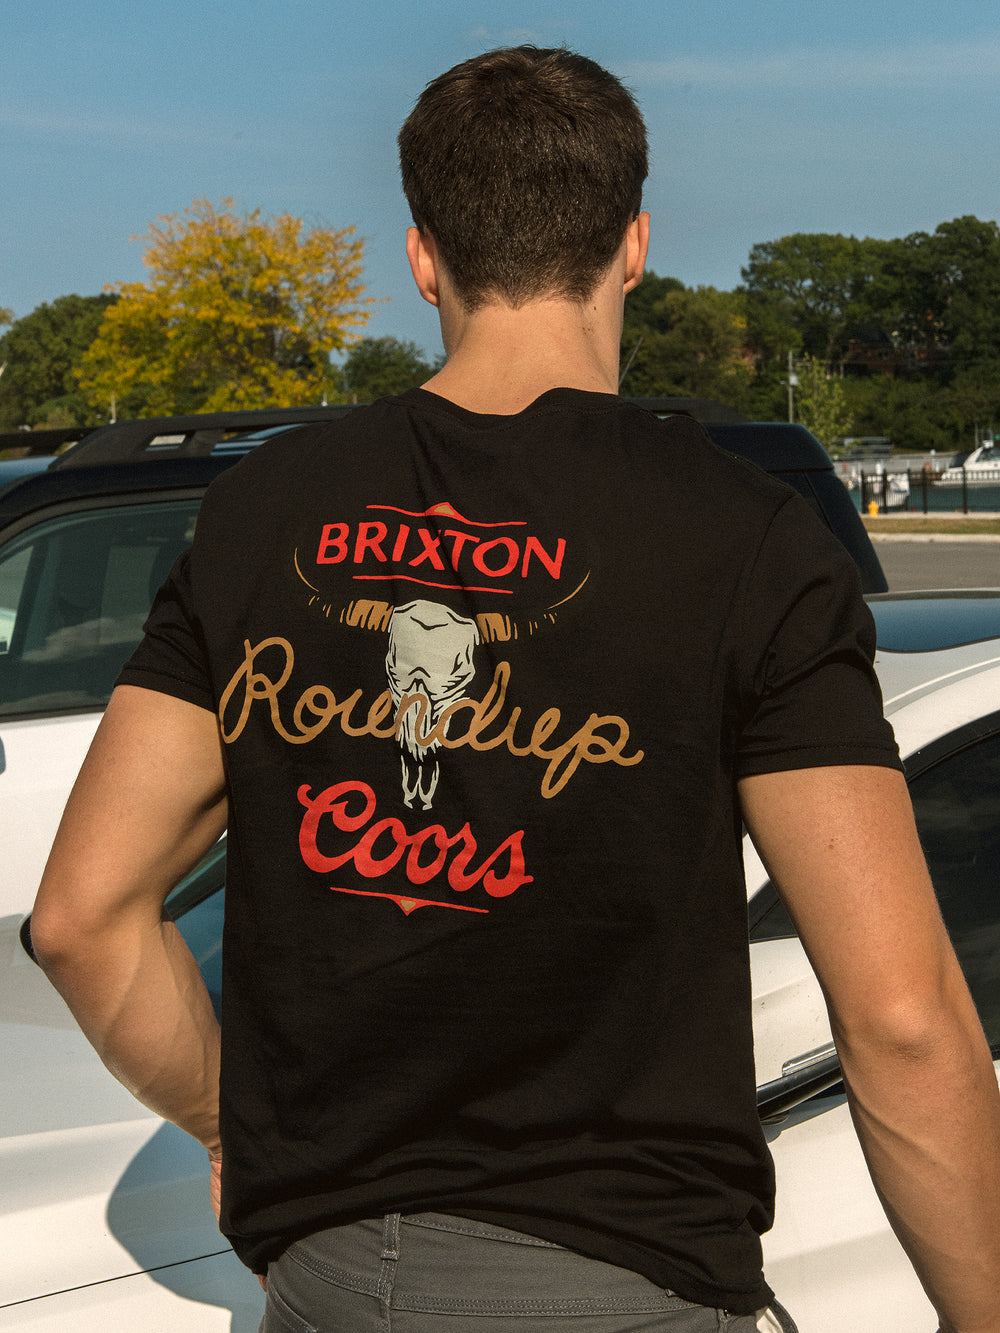 BRIXTON COORS ROUND UP T-SHIRT